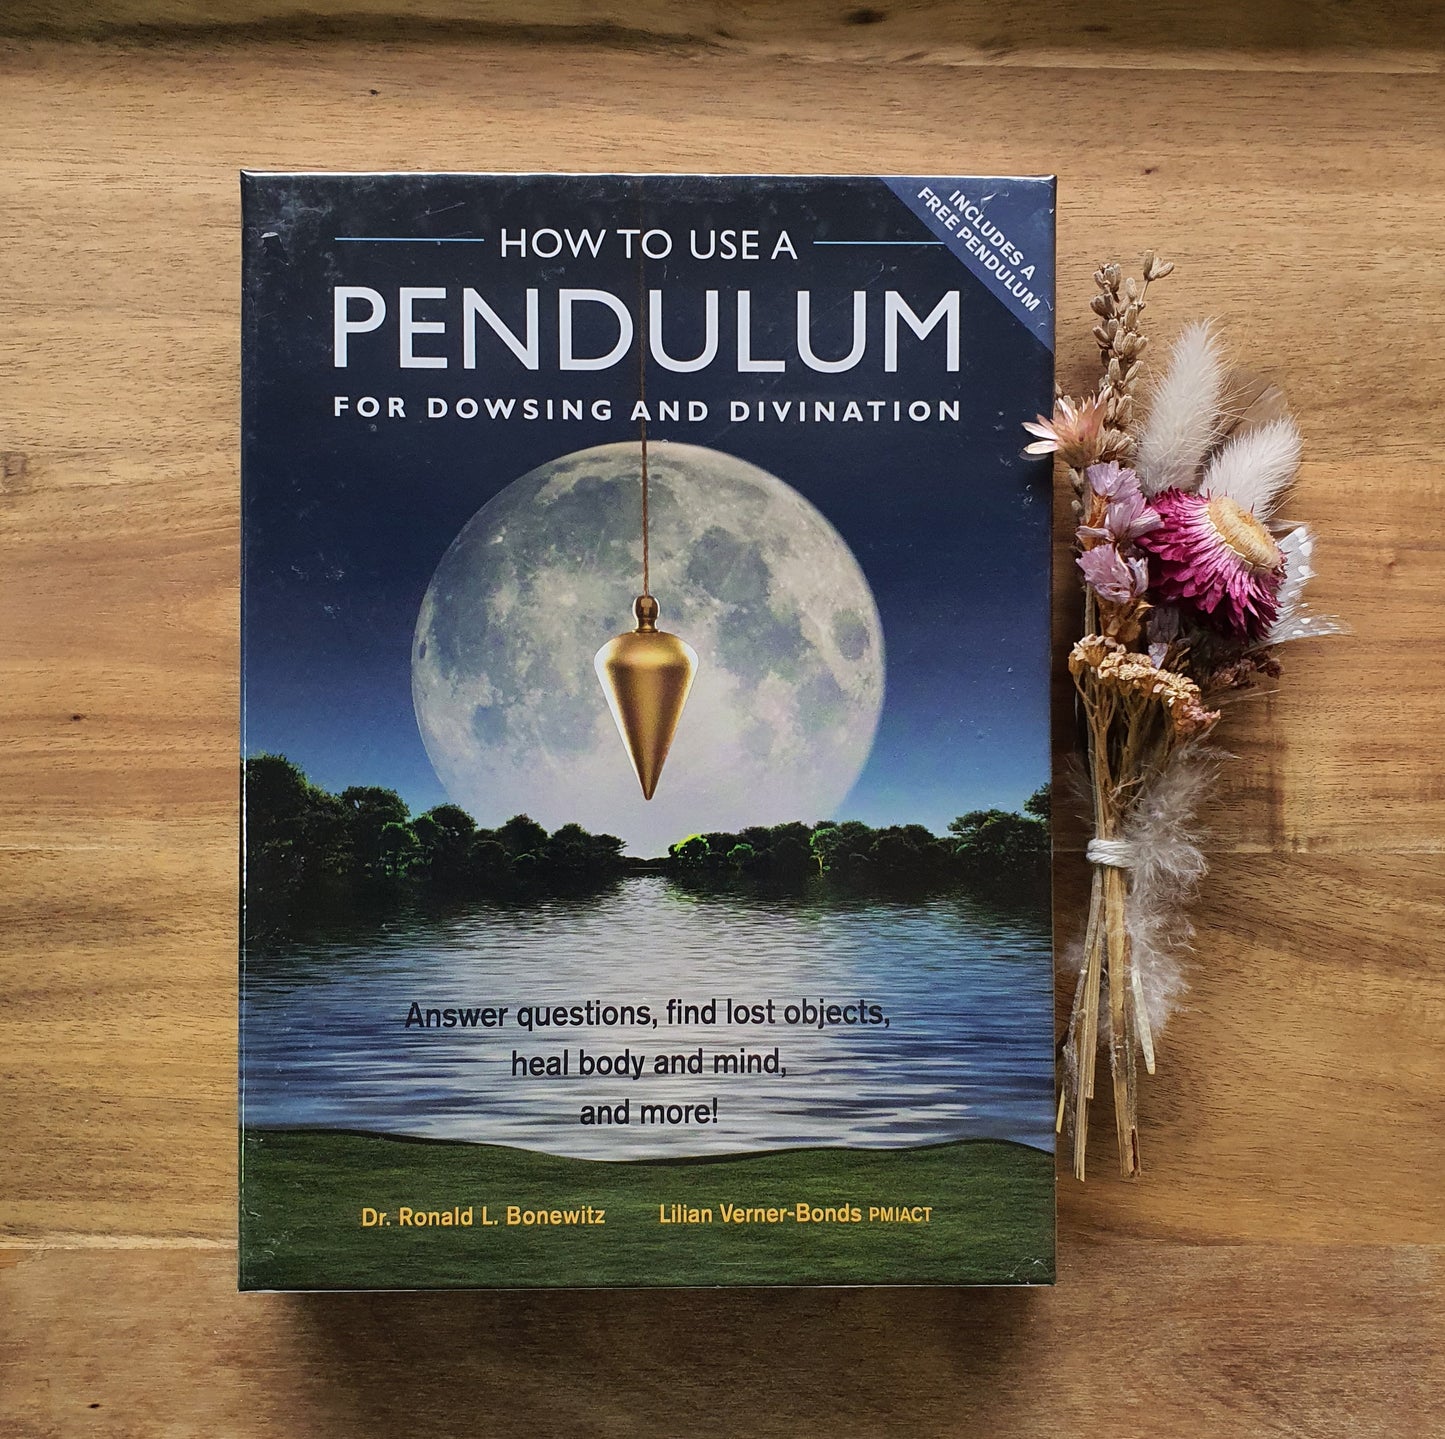 How To Use A Pendulum for Dowsing and Divination